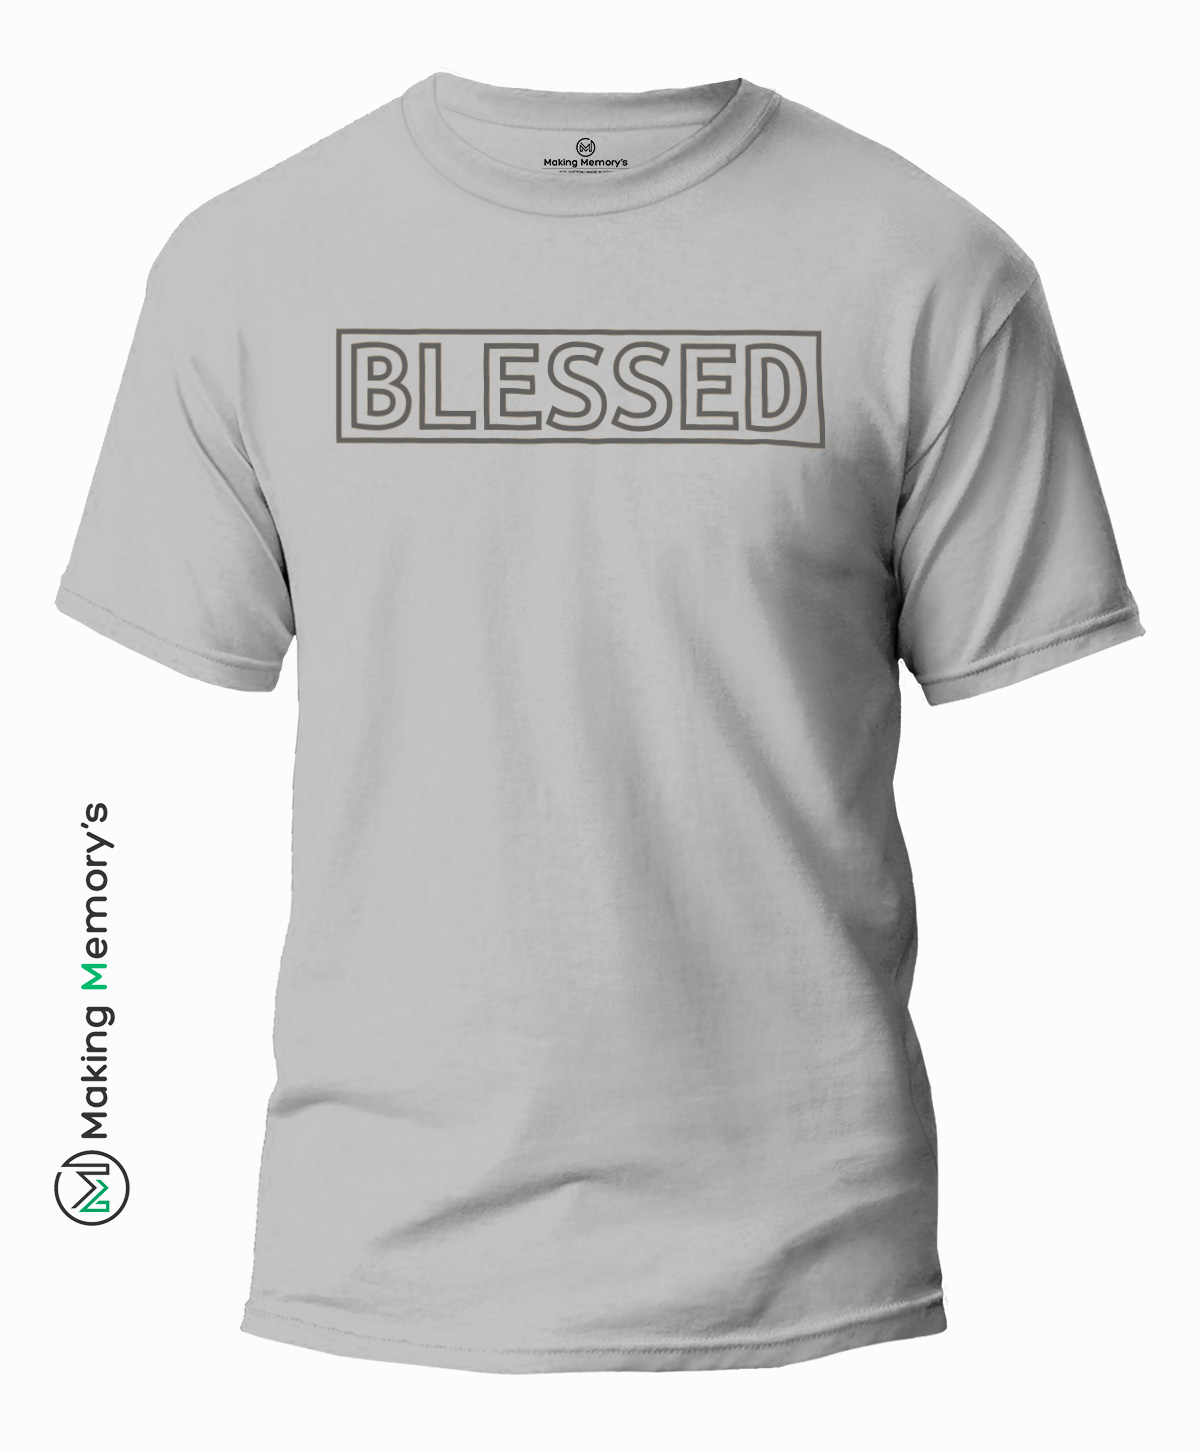 The-Blessed-Gray-T-Shirt